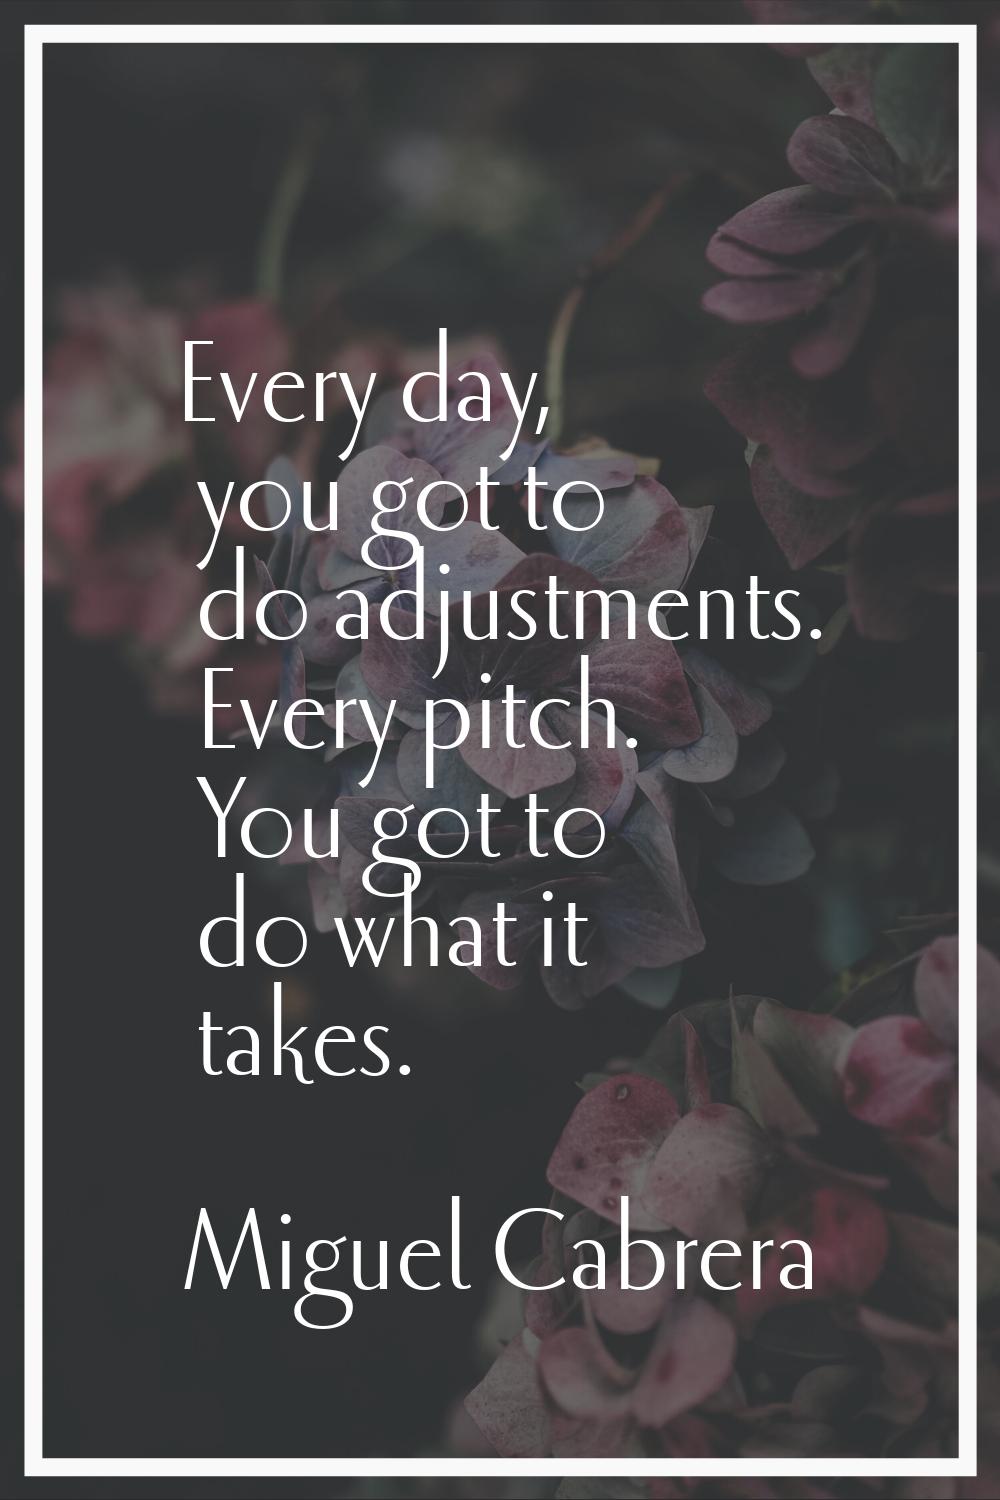 Every day, you got to do adjustments. Every pitch. You got to do what it takes.